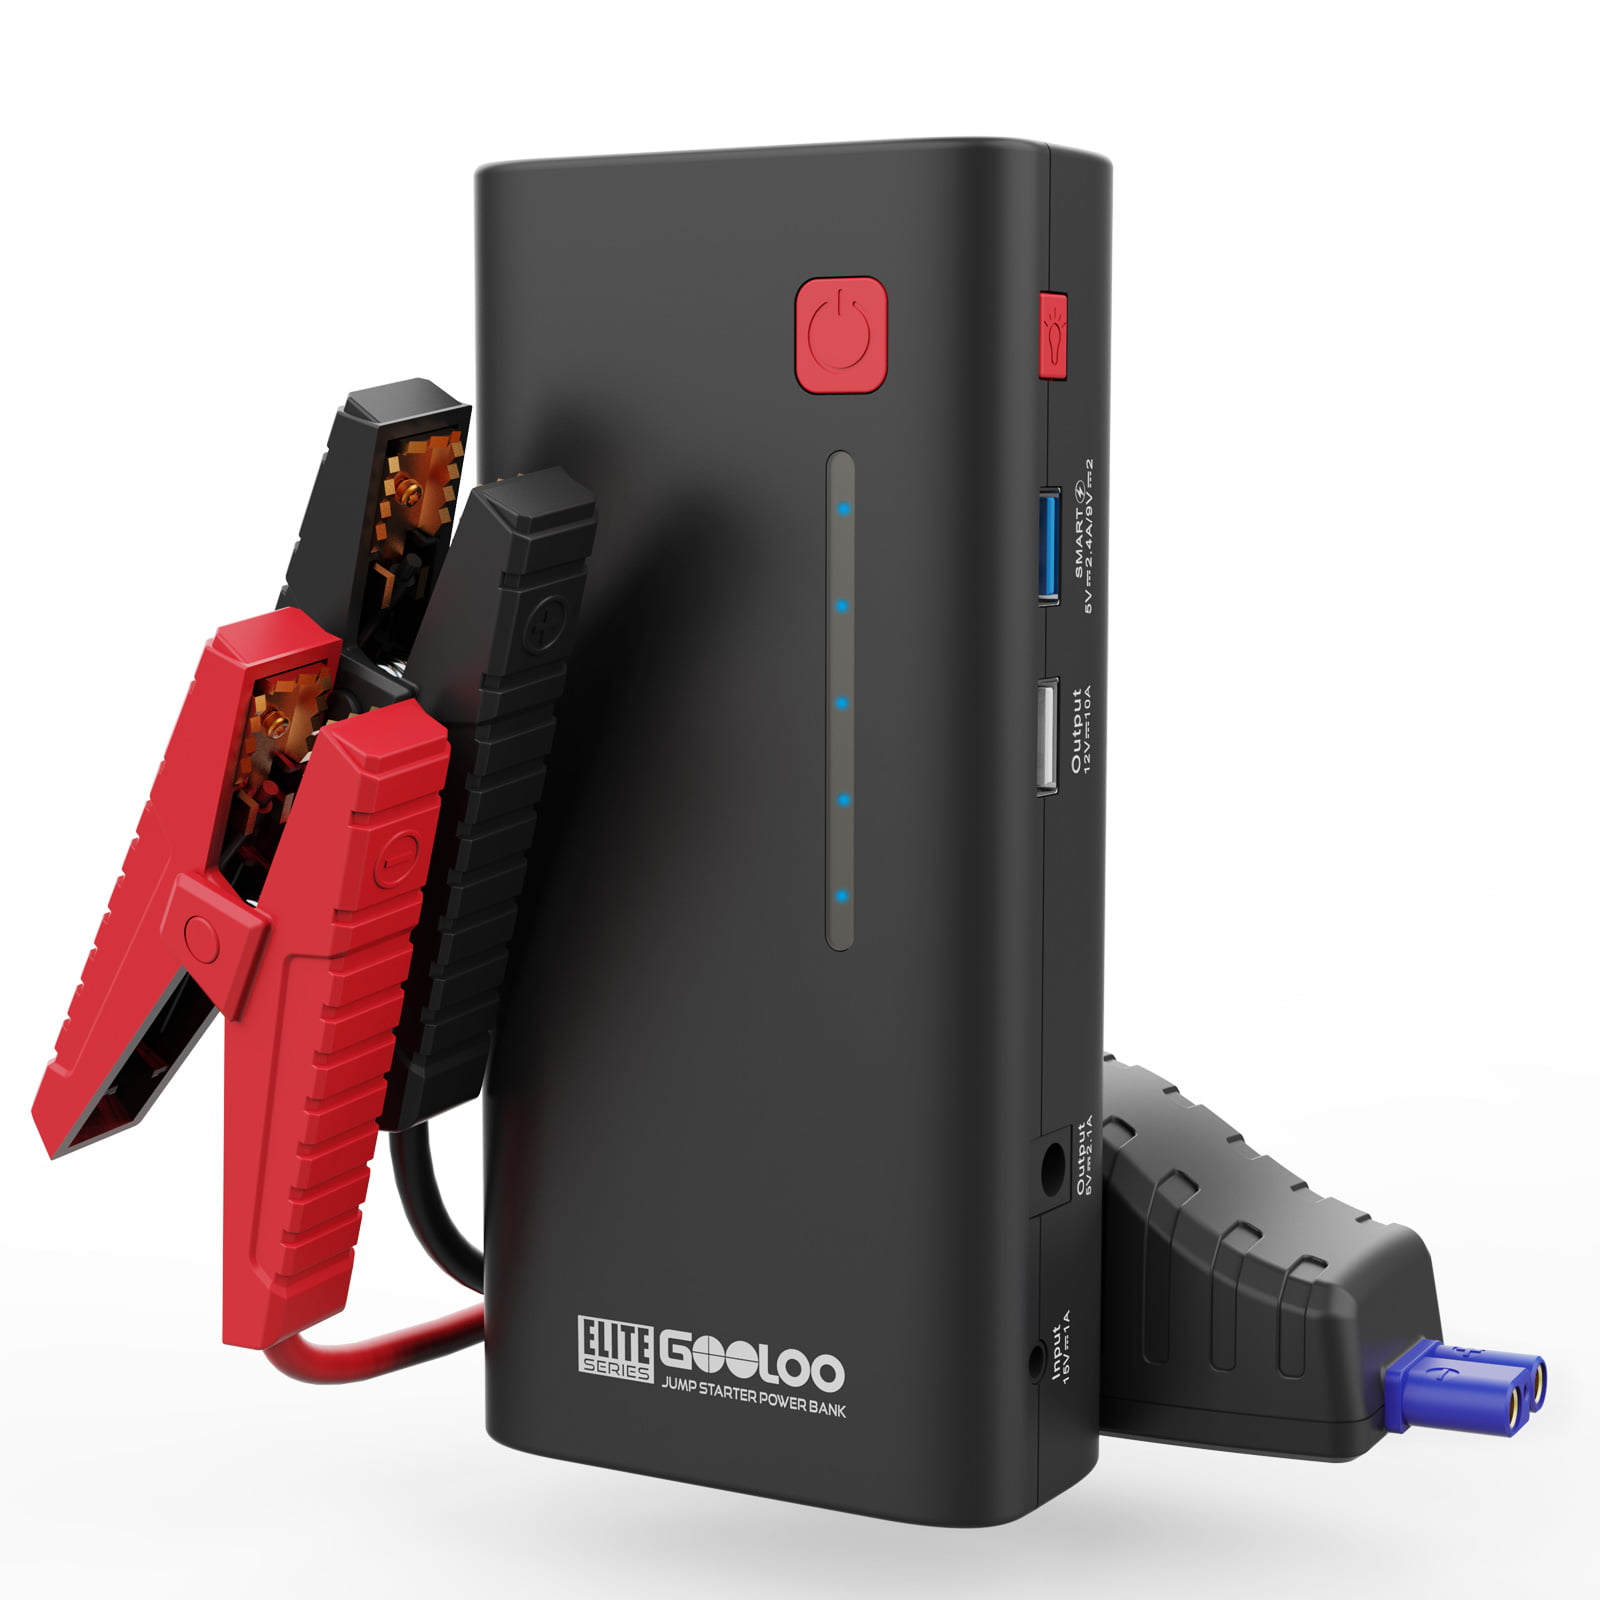 Gooloo 1200A Peak 18000mAh SuperSafe Car Jump Starter with USB Quick Charge for Up to 7.0L Gas or 5.5L Diesel Engine, 12V Portable Power Pack Auto Battery Booster Box Phone Charger